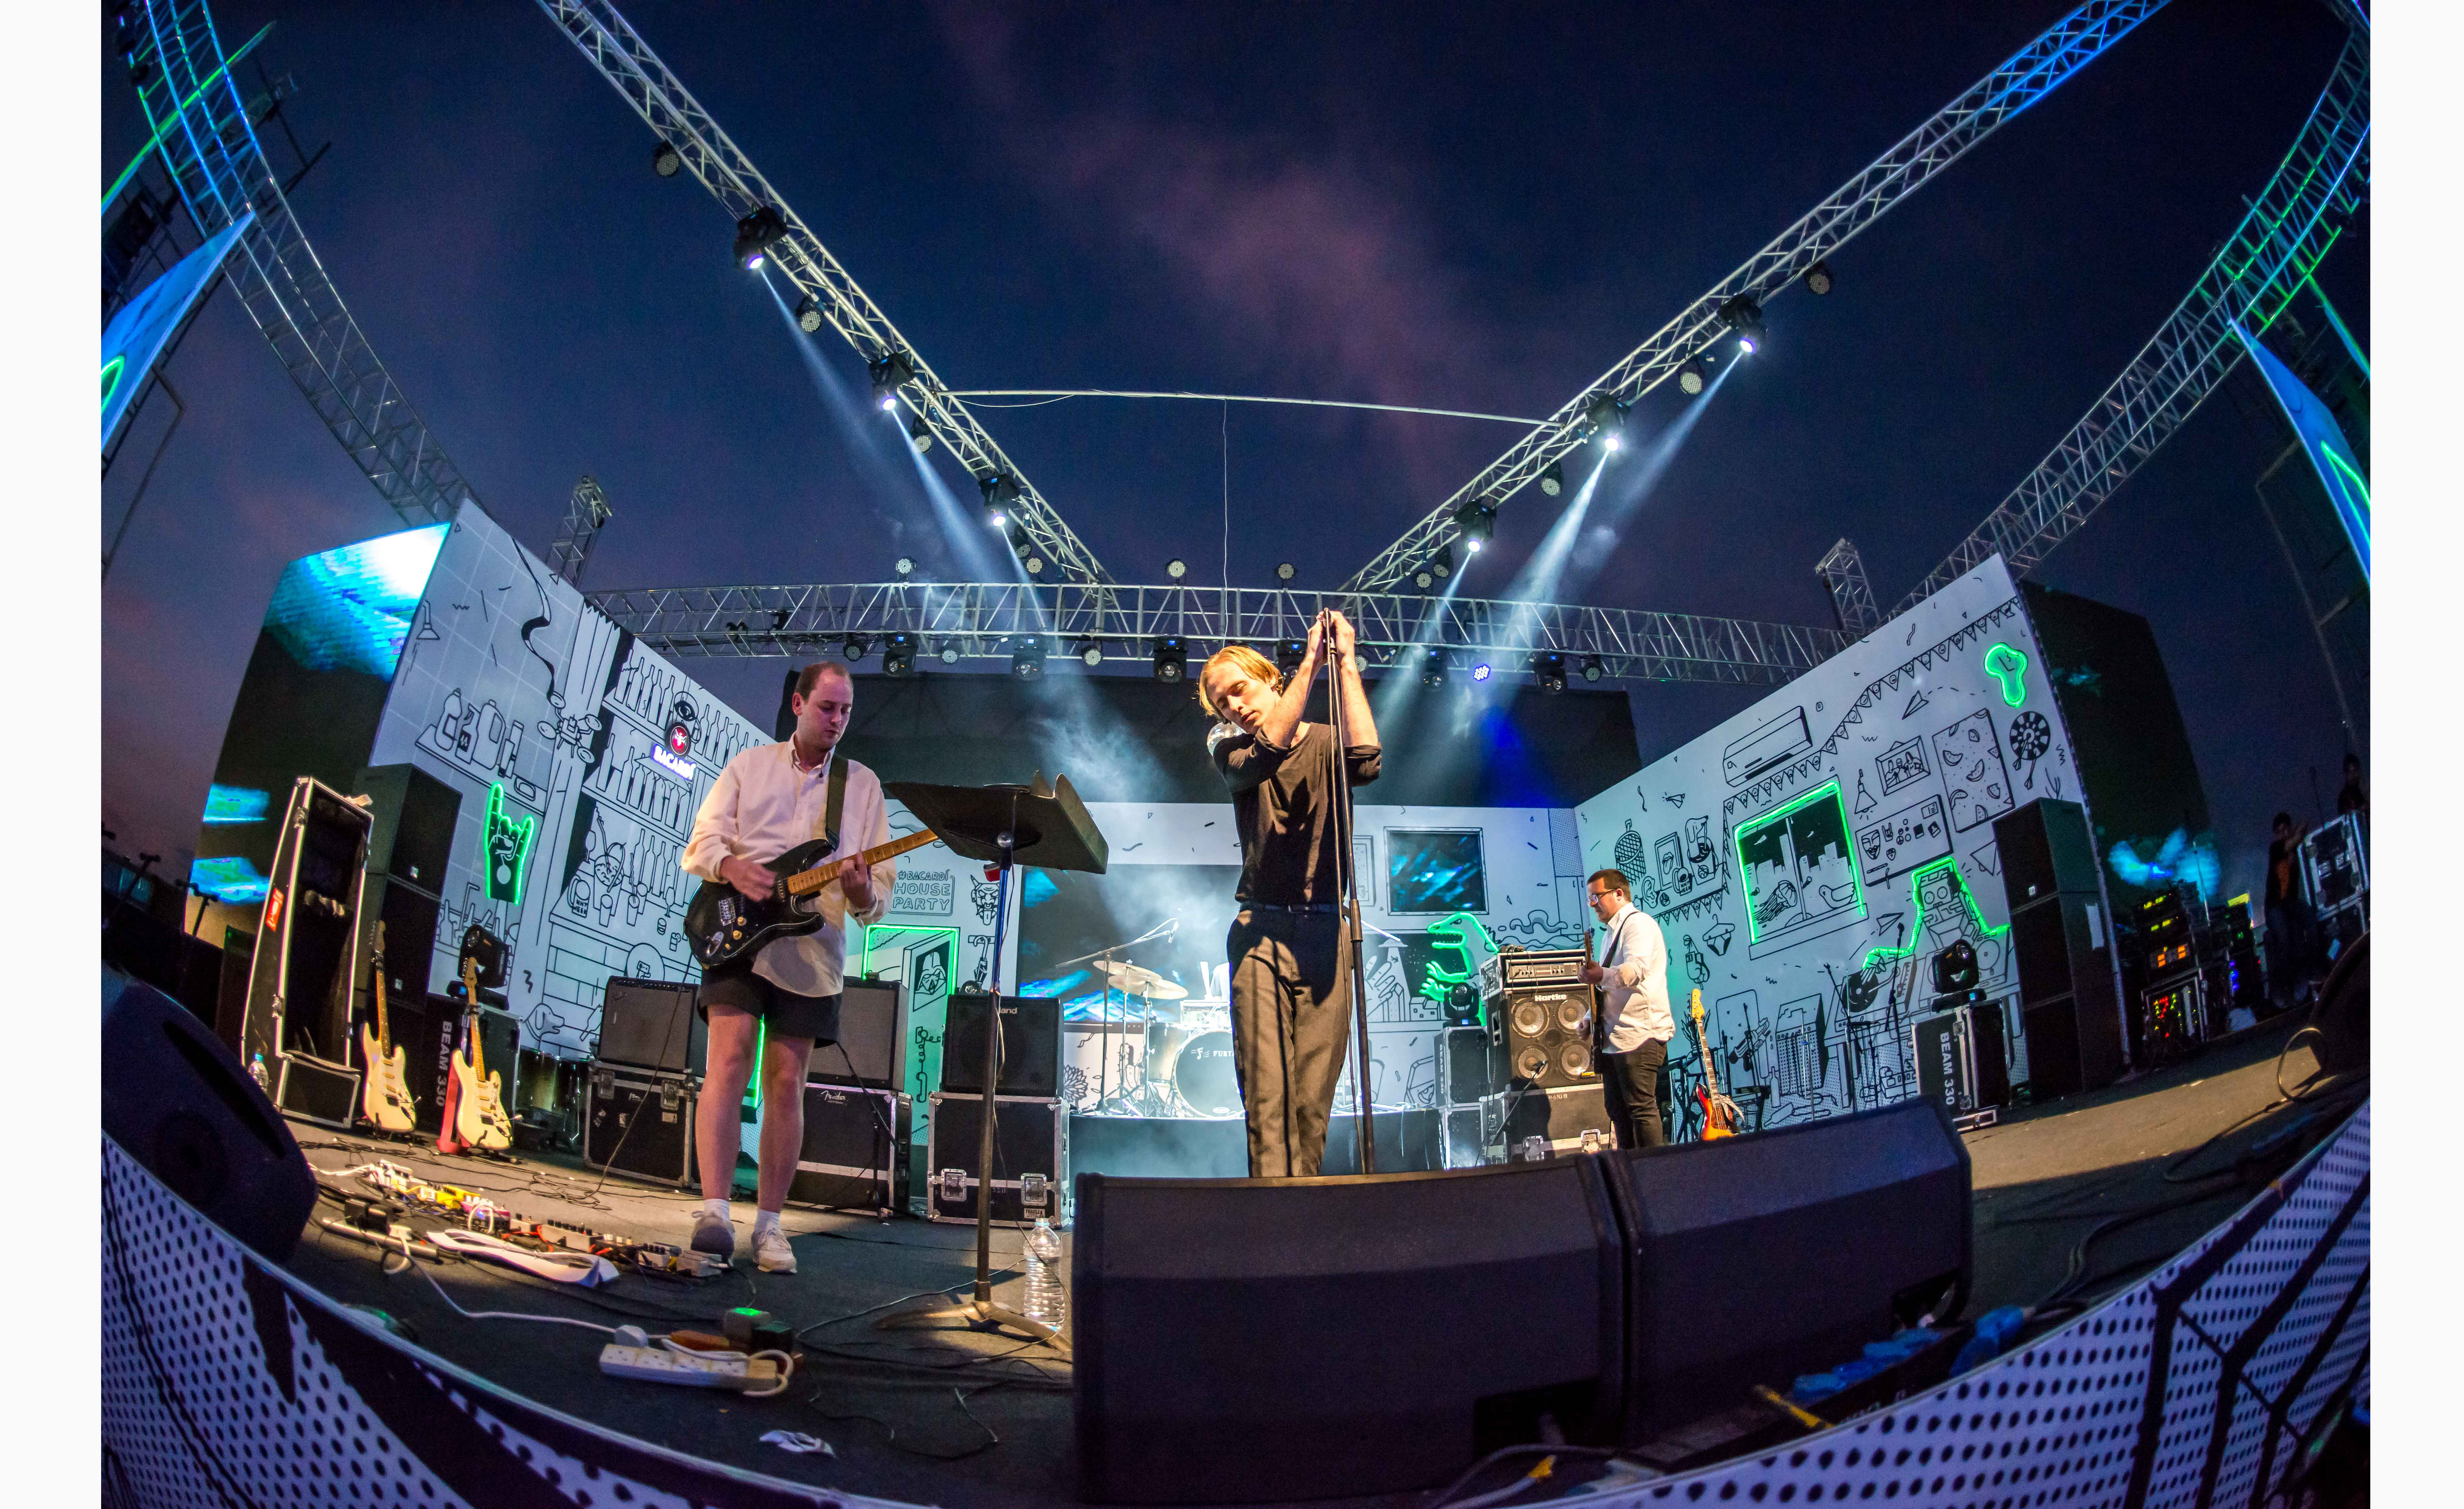  Eagulls performance on Day 3 of Bacardi NH7 Weekender Pune. Photo Credit - Clique Photography